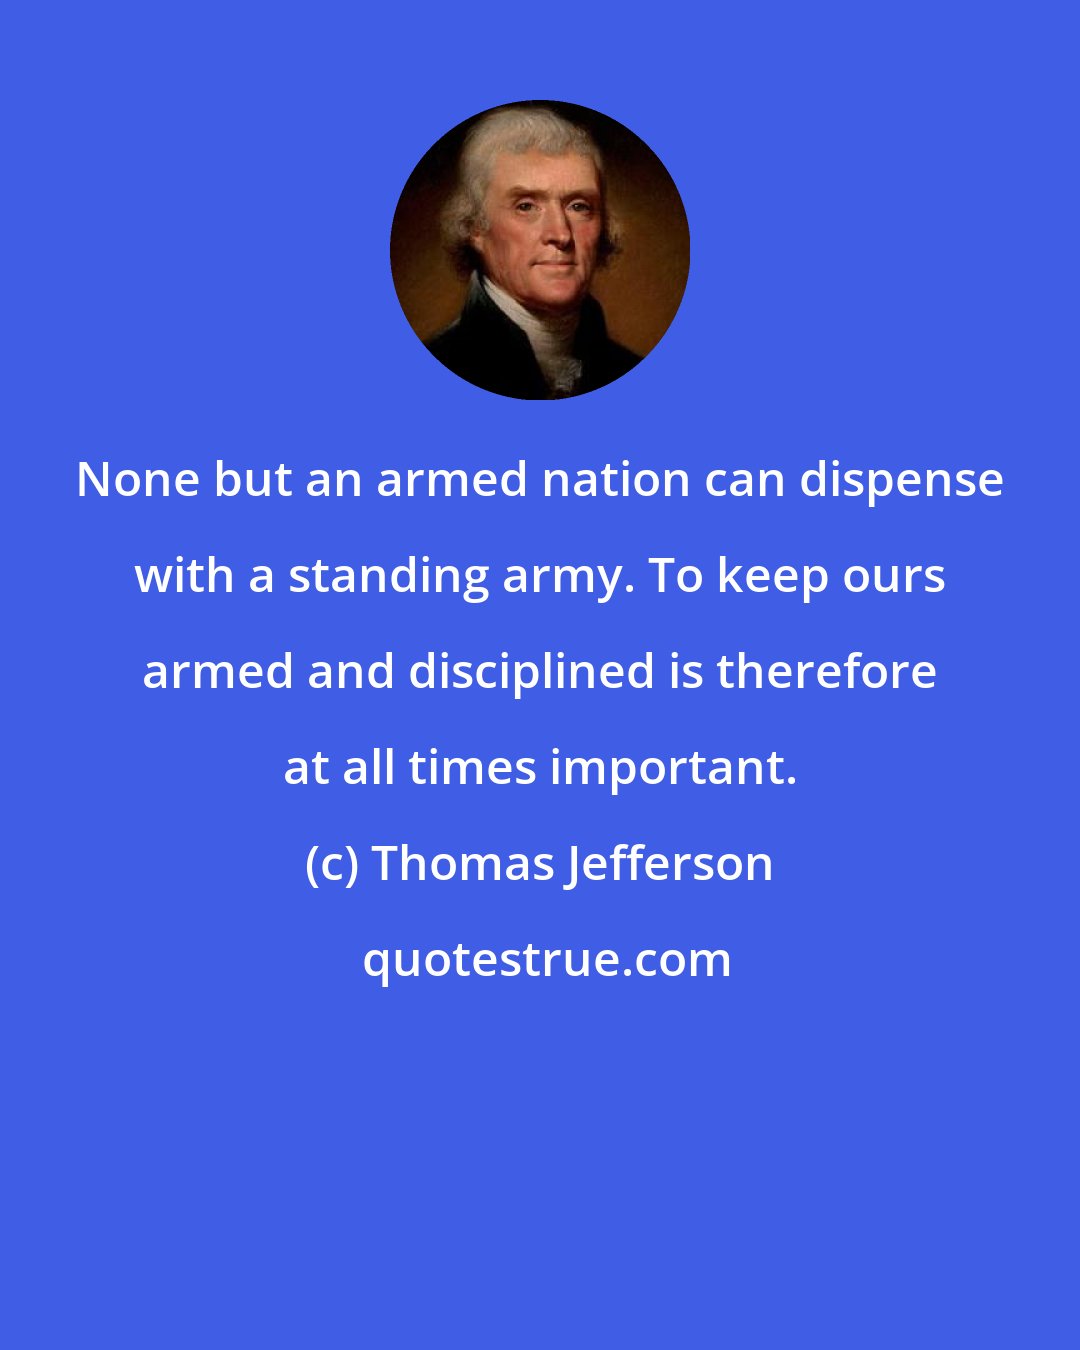 Thomas Jefferson: None but an armed nation can dispense with a standing army. To keep ours armed and disciplined is therefore at all times important.